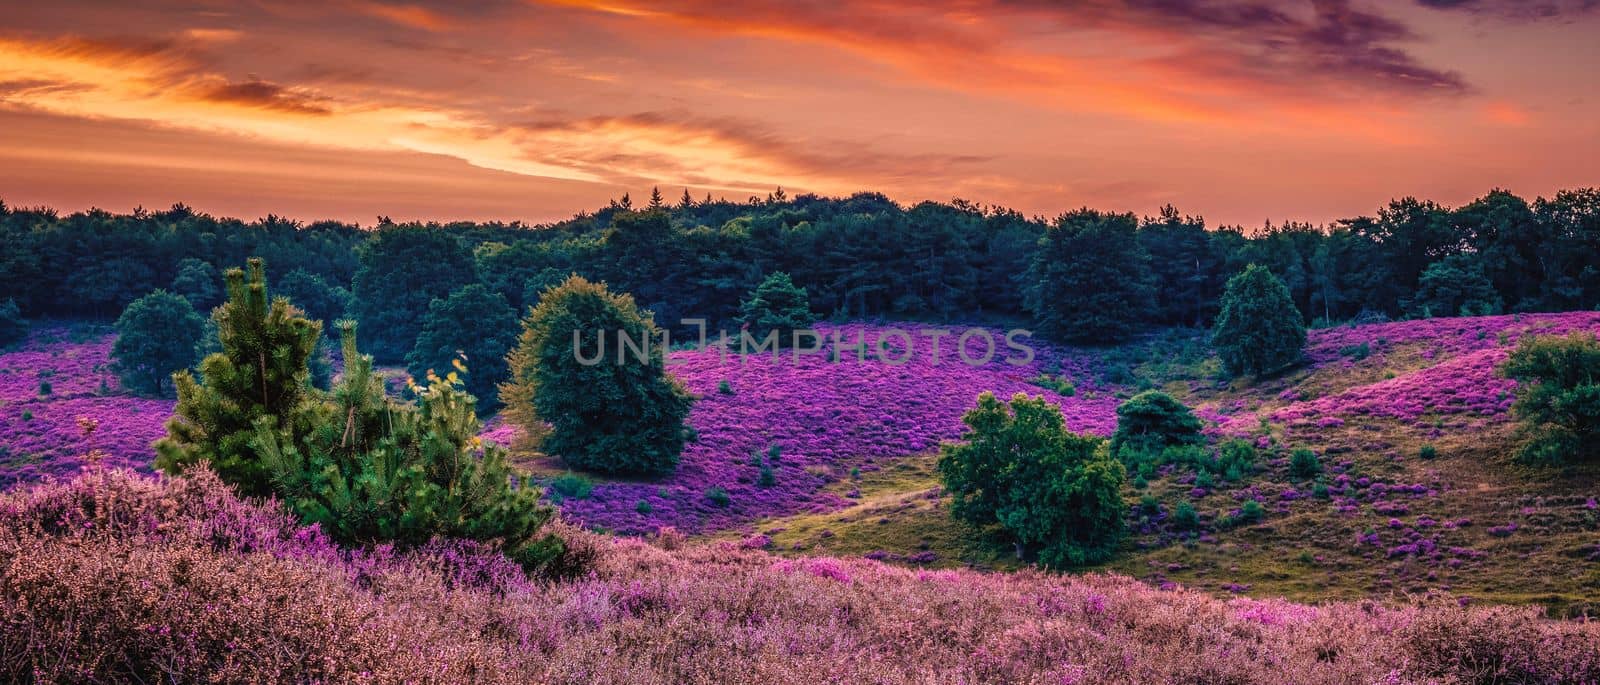 Posbank national park Veluwezoom, blooming Heather fields during Sunrise in the Netherlands by fokkebok